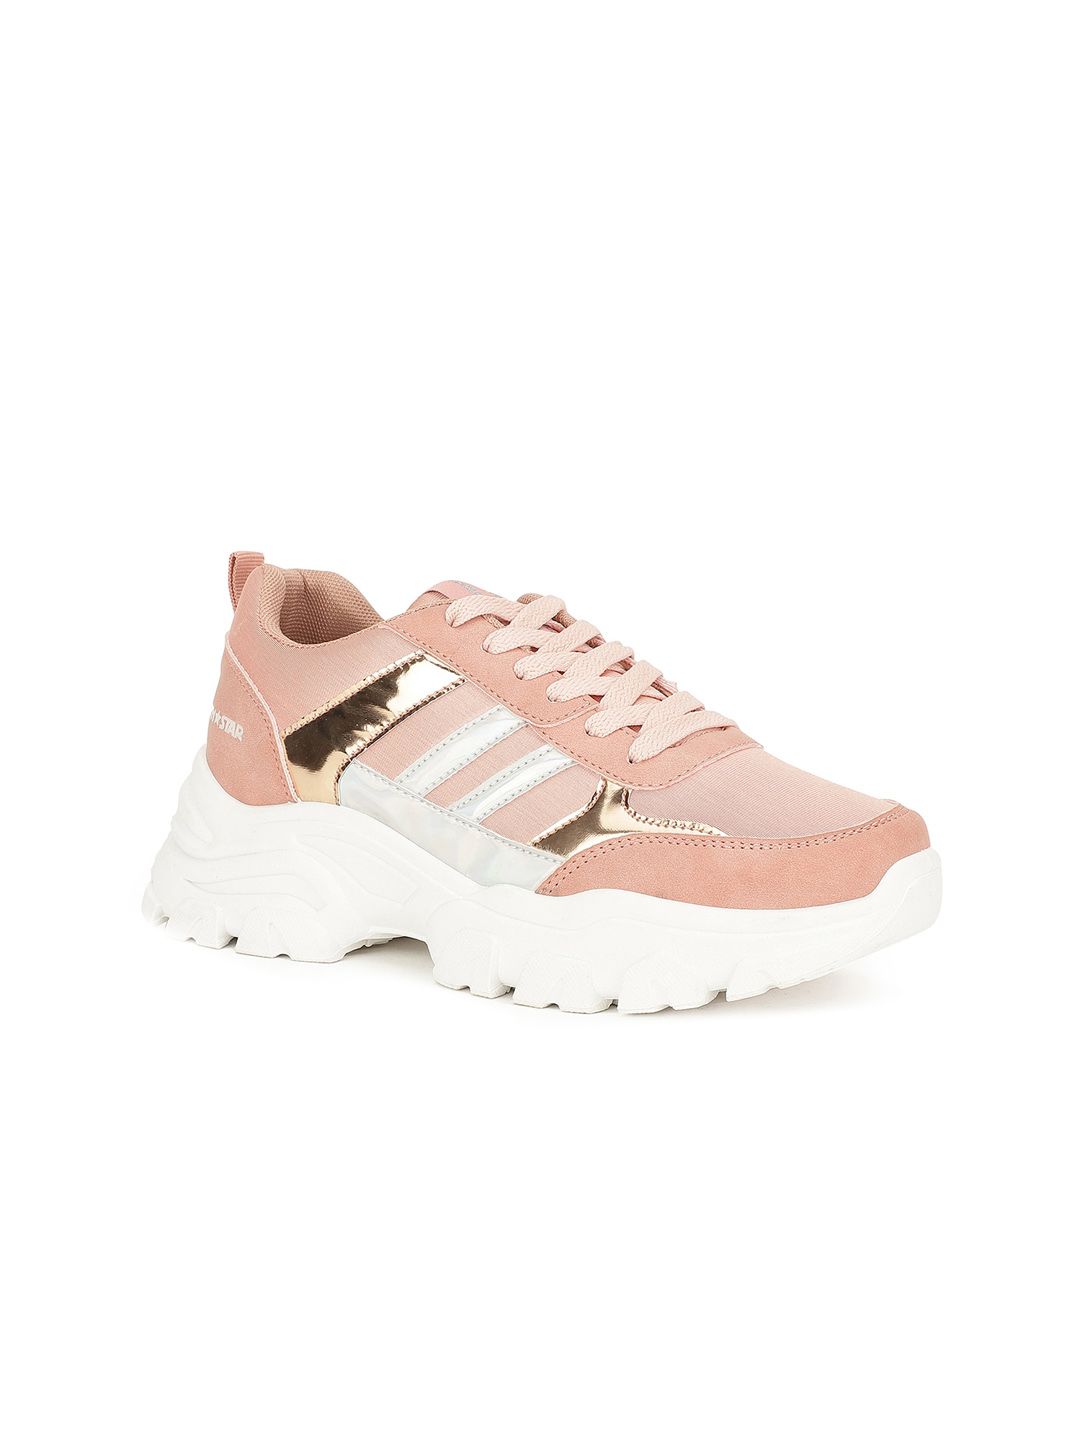 North Star Women Pink Colourblocked PU Sneakers Price in India